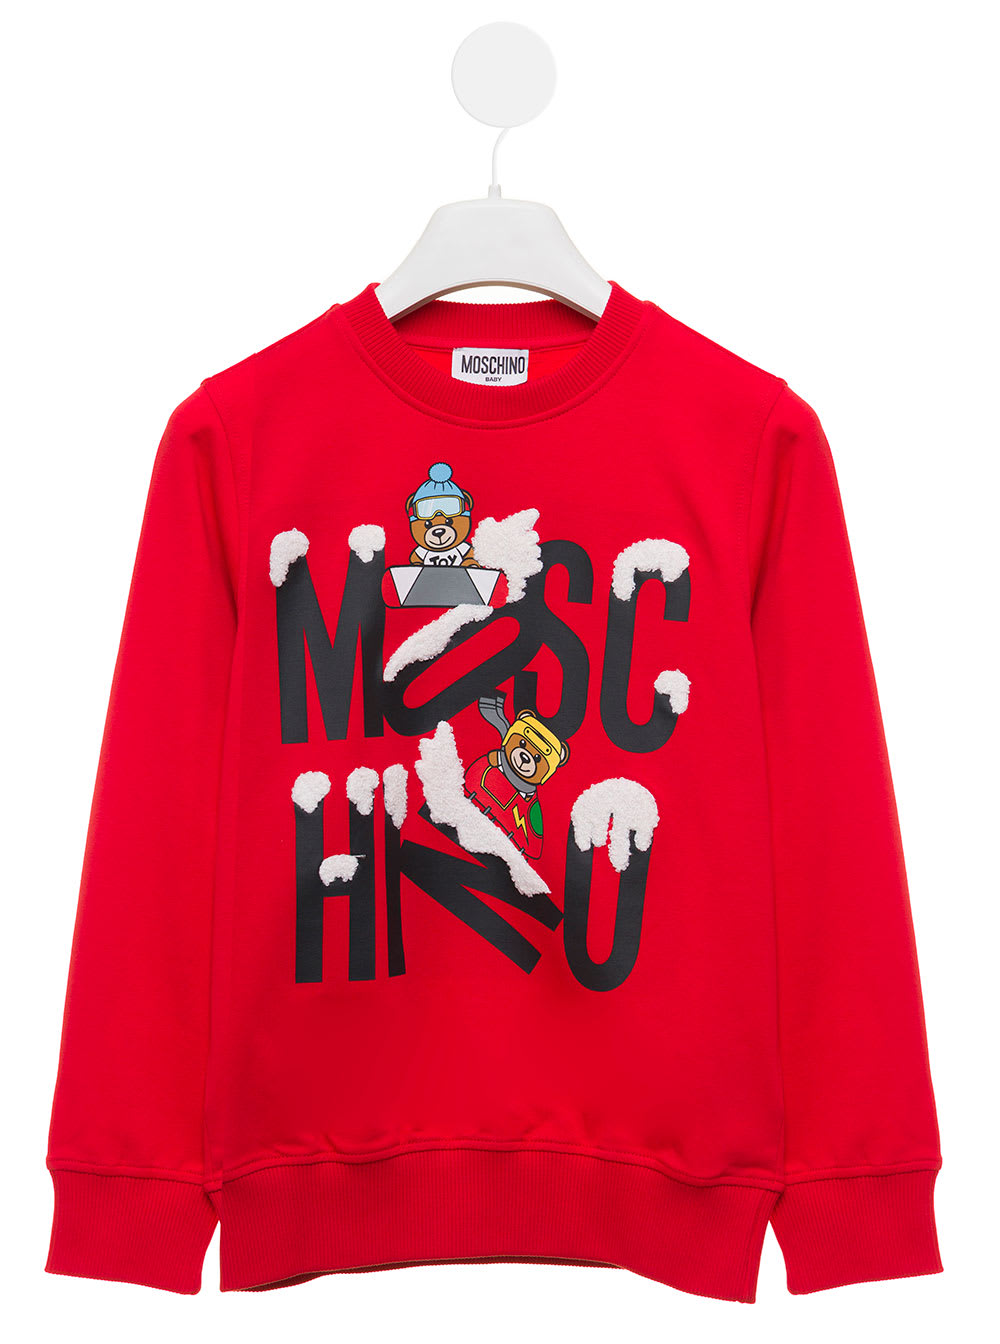 Moschino Red Cotton Sweatshirt With Teddy Bear Characteristic Print On The Front